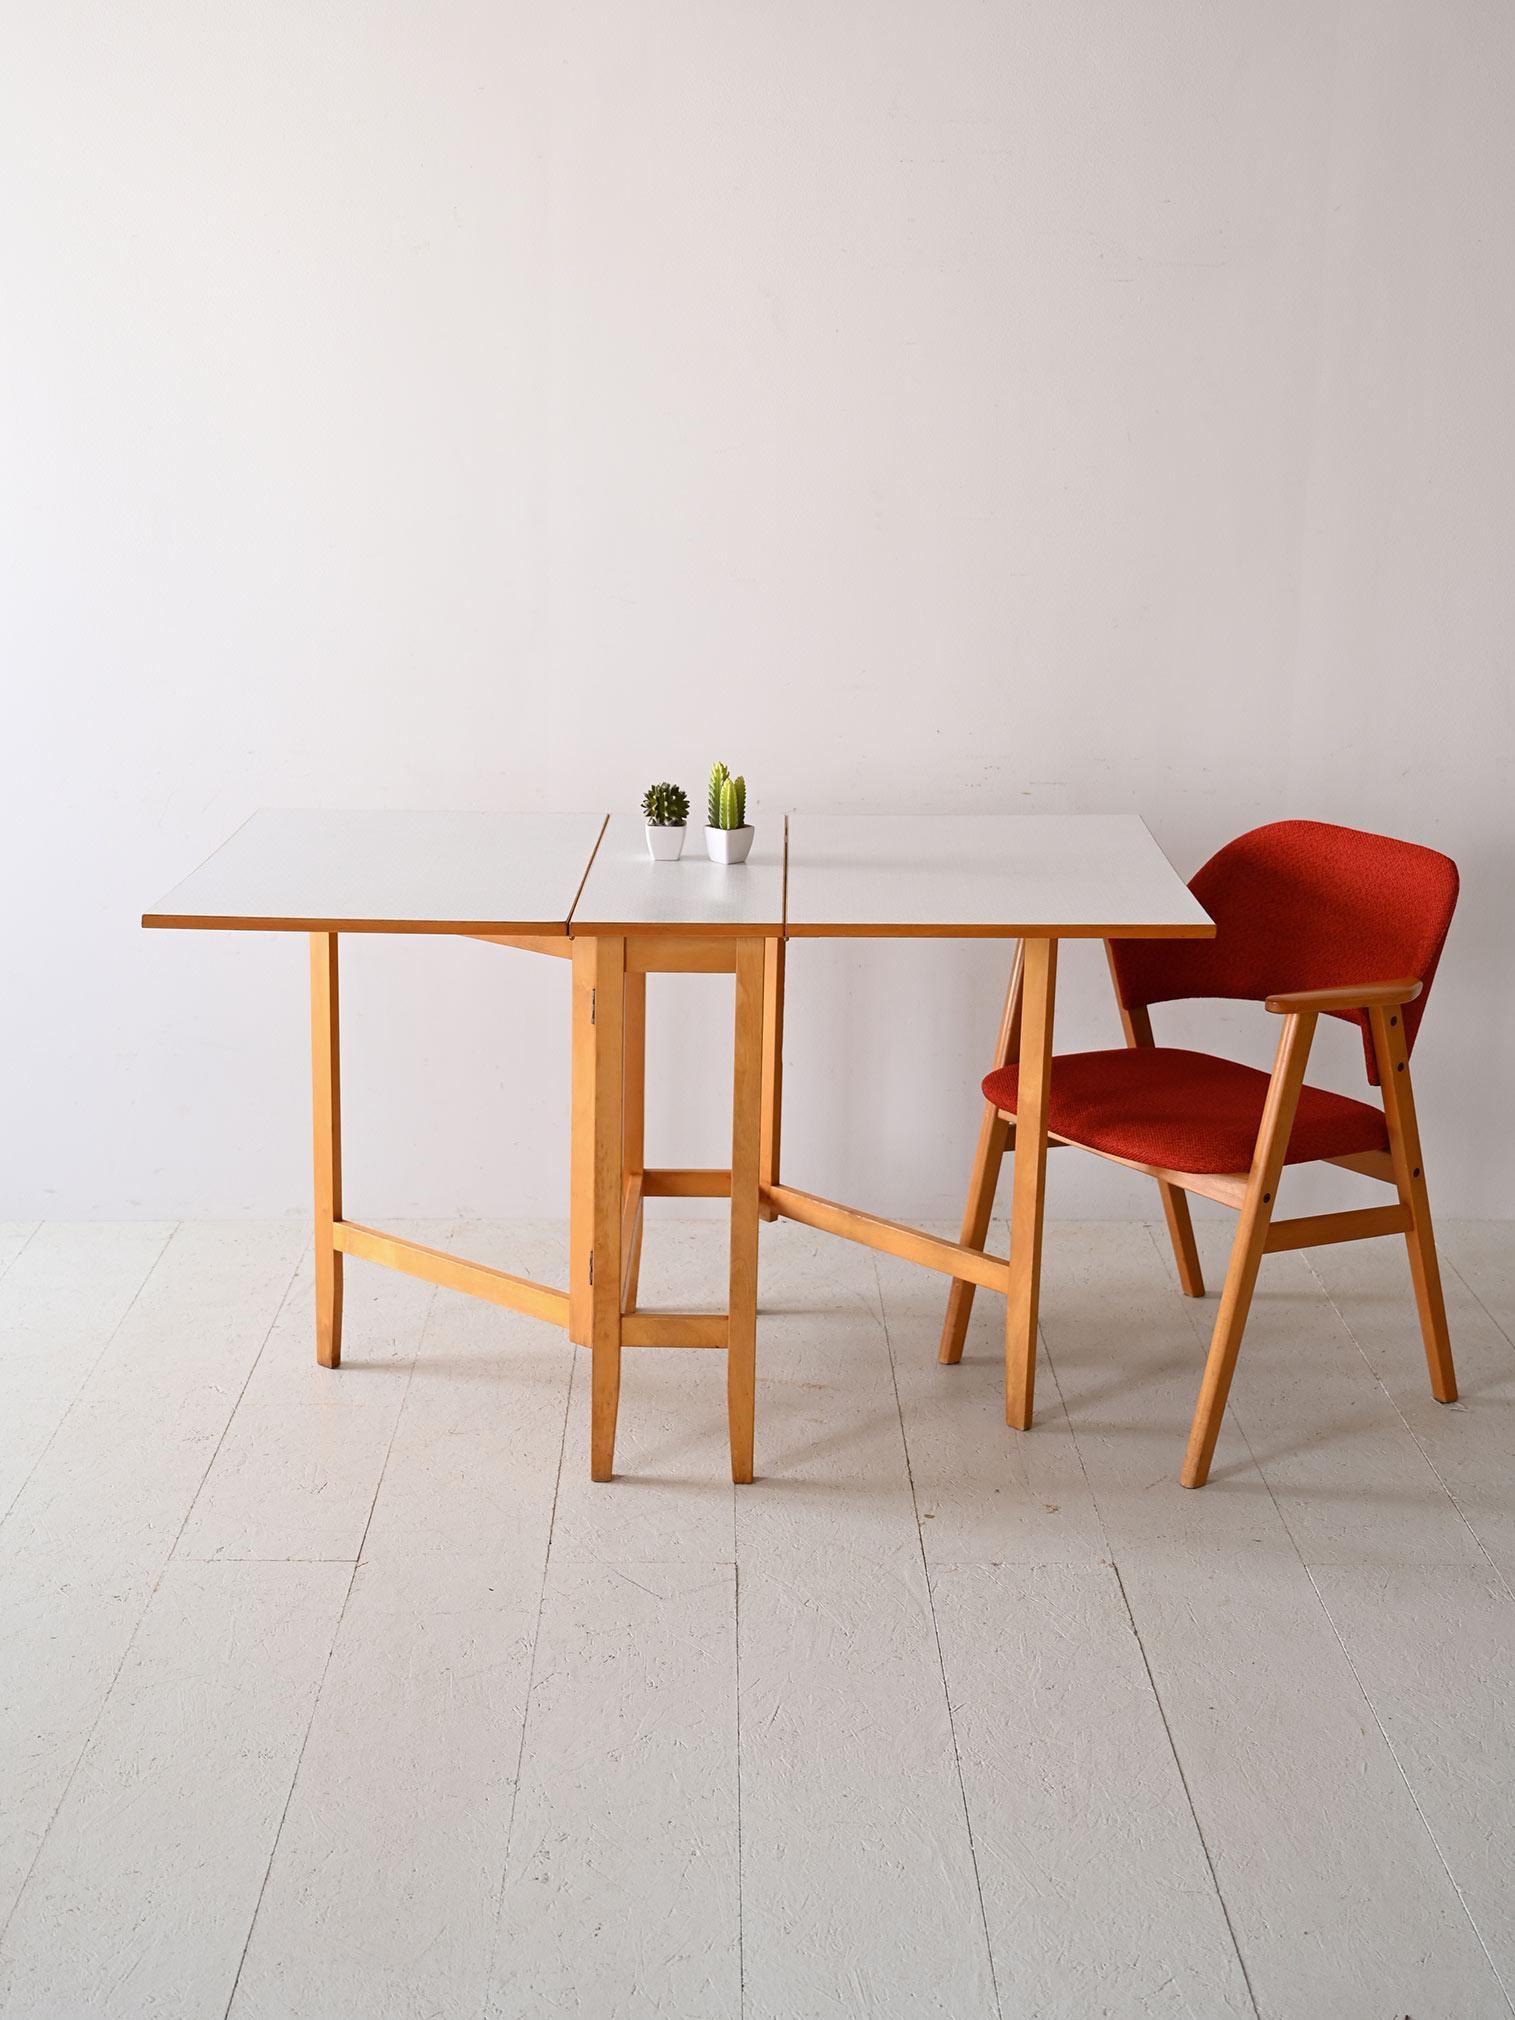 This Scandinavian extending table, with its durable formica top and teak wood edges, is a perfect example of functional design. Designed to fit flexible spaces, the table can be extended to accommodate additional guests, making it ideal for